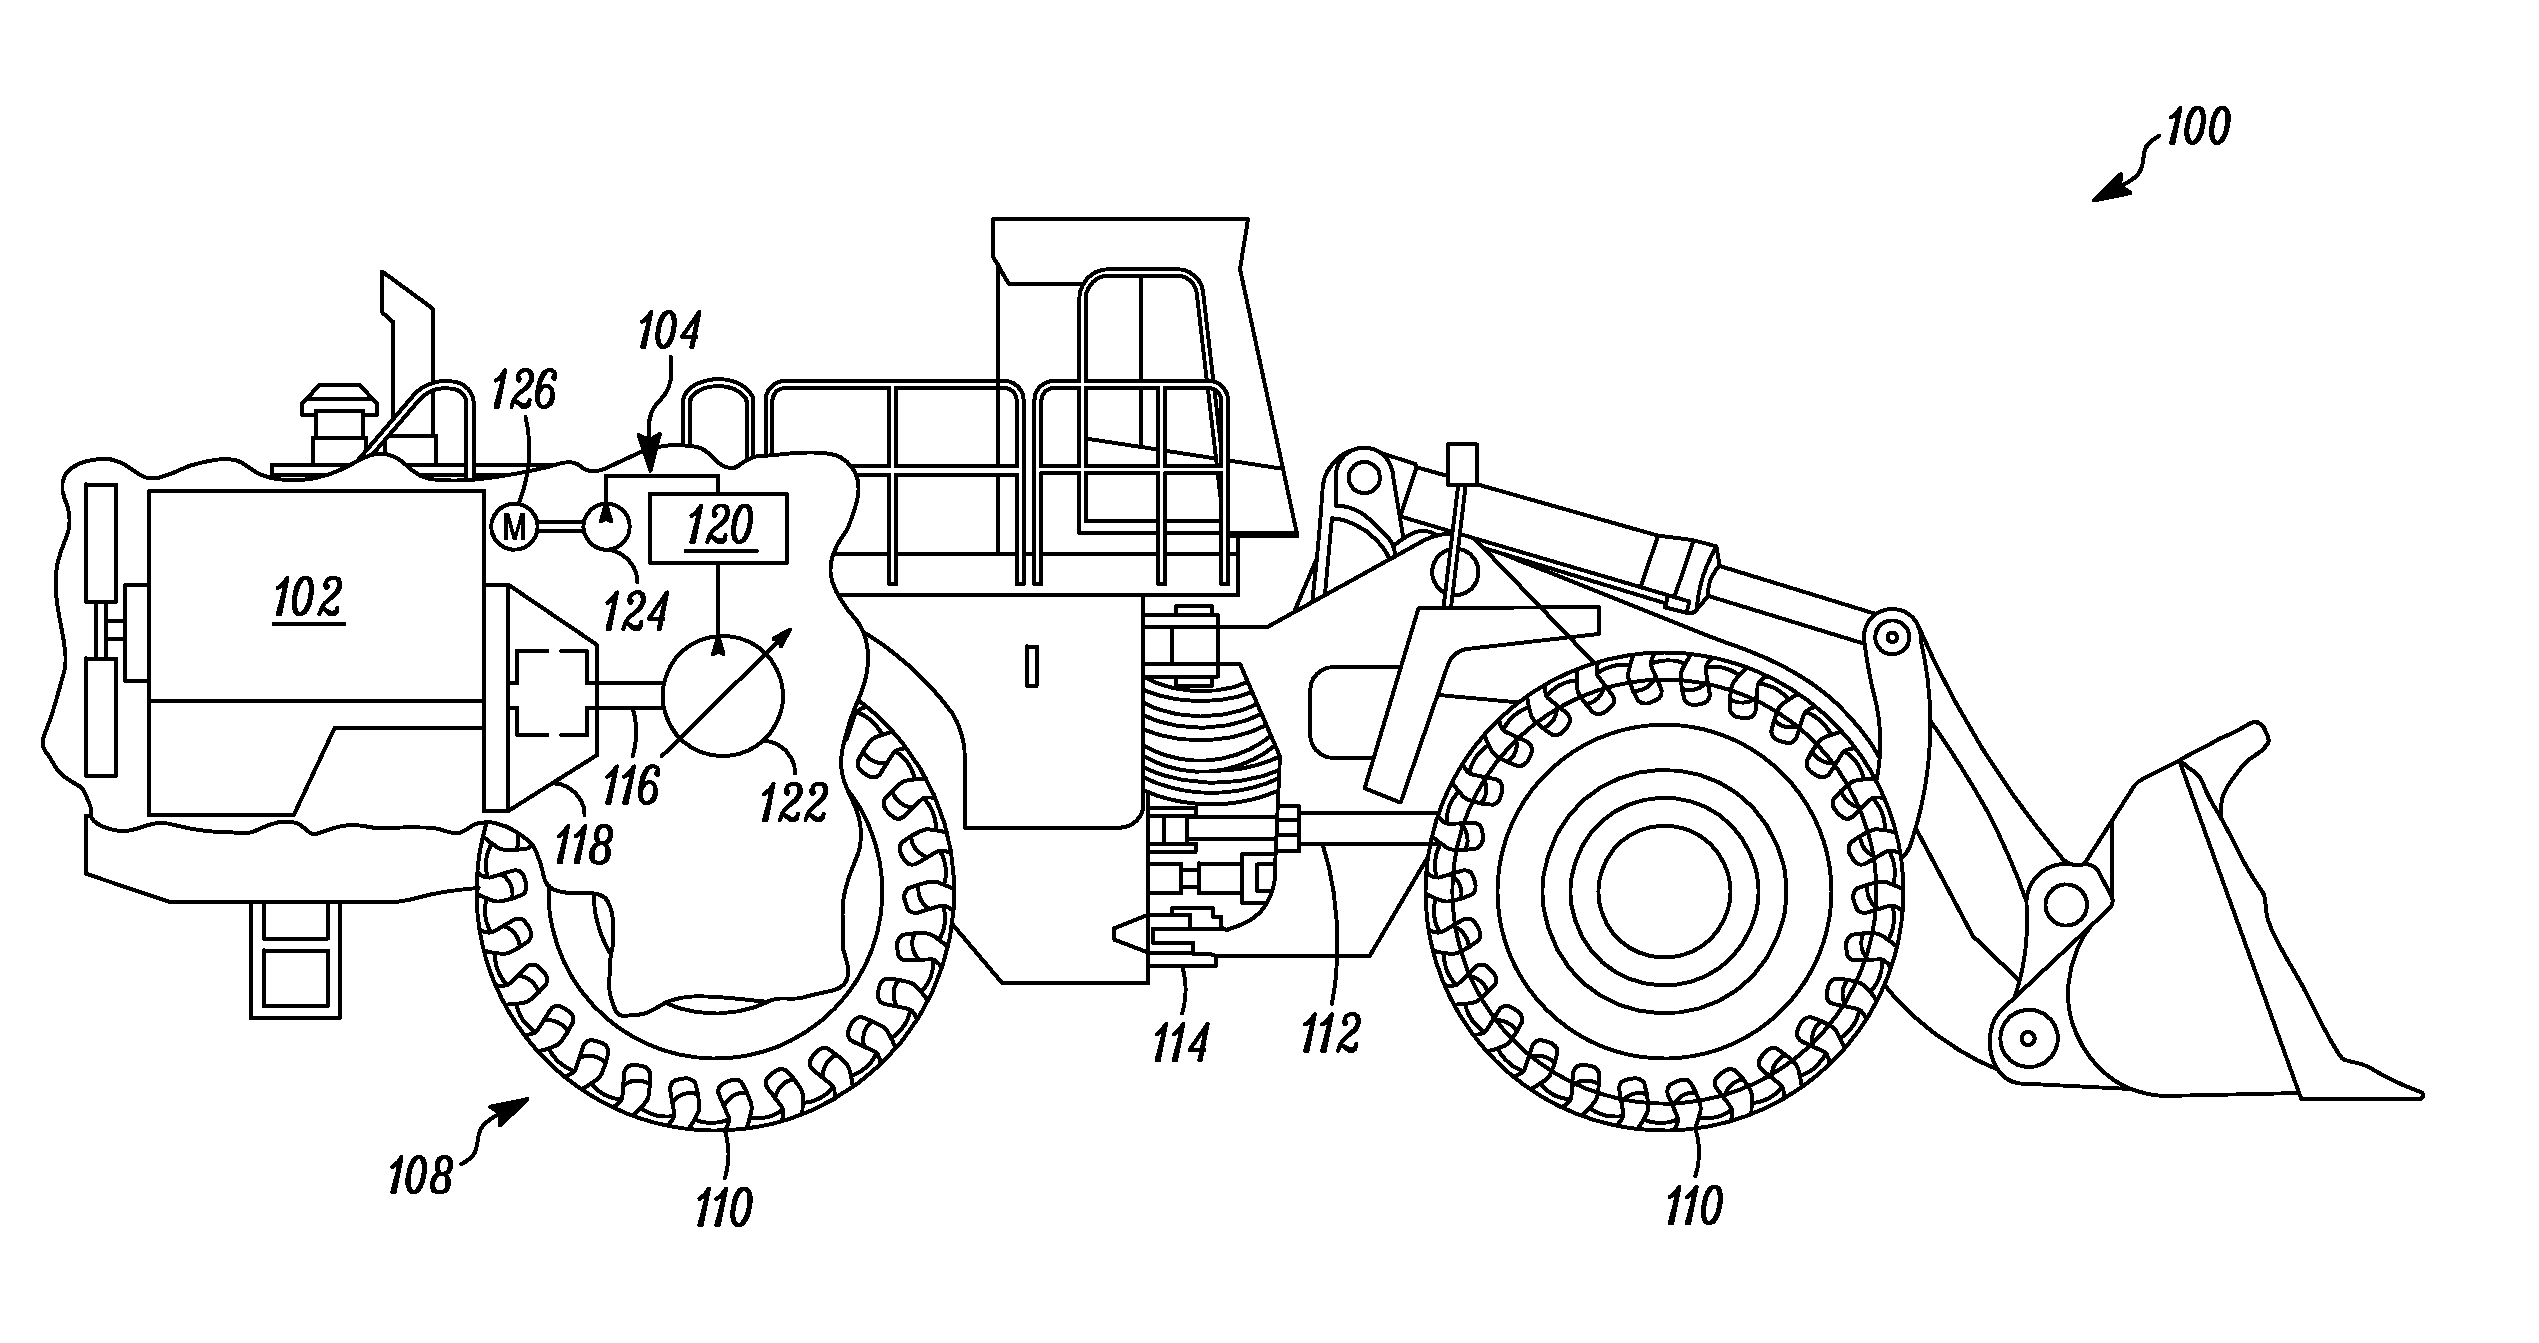 Secondary steering system with margin pressure detection